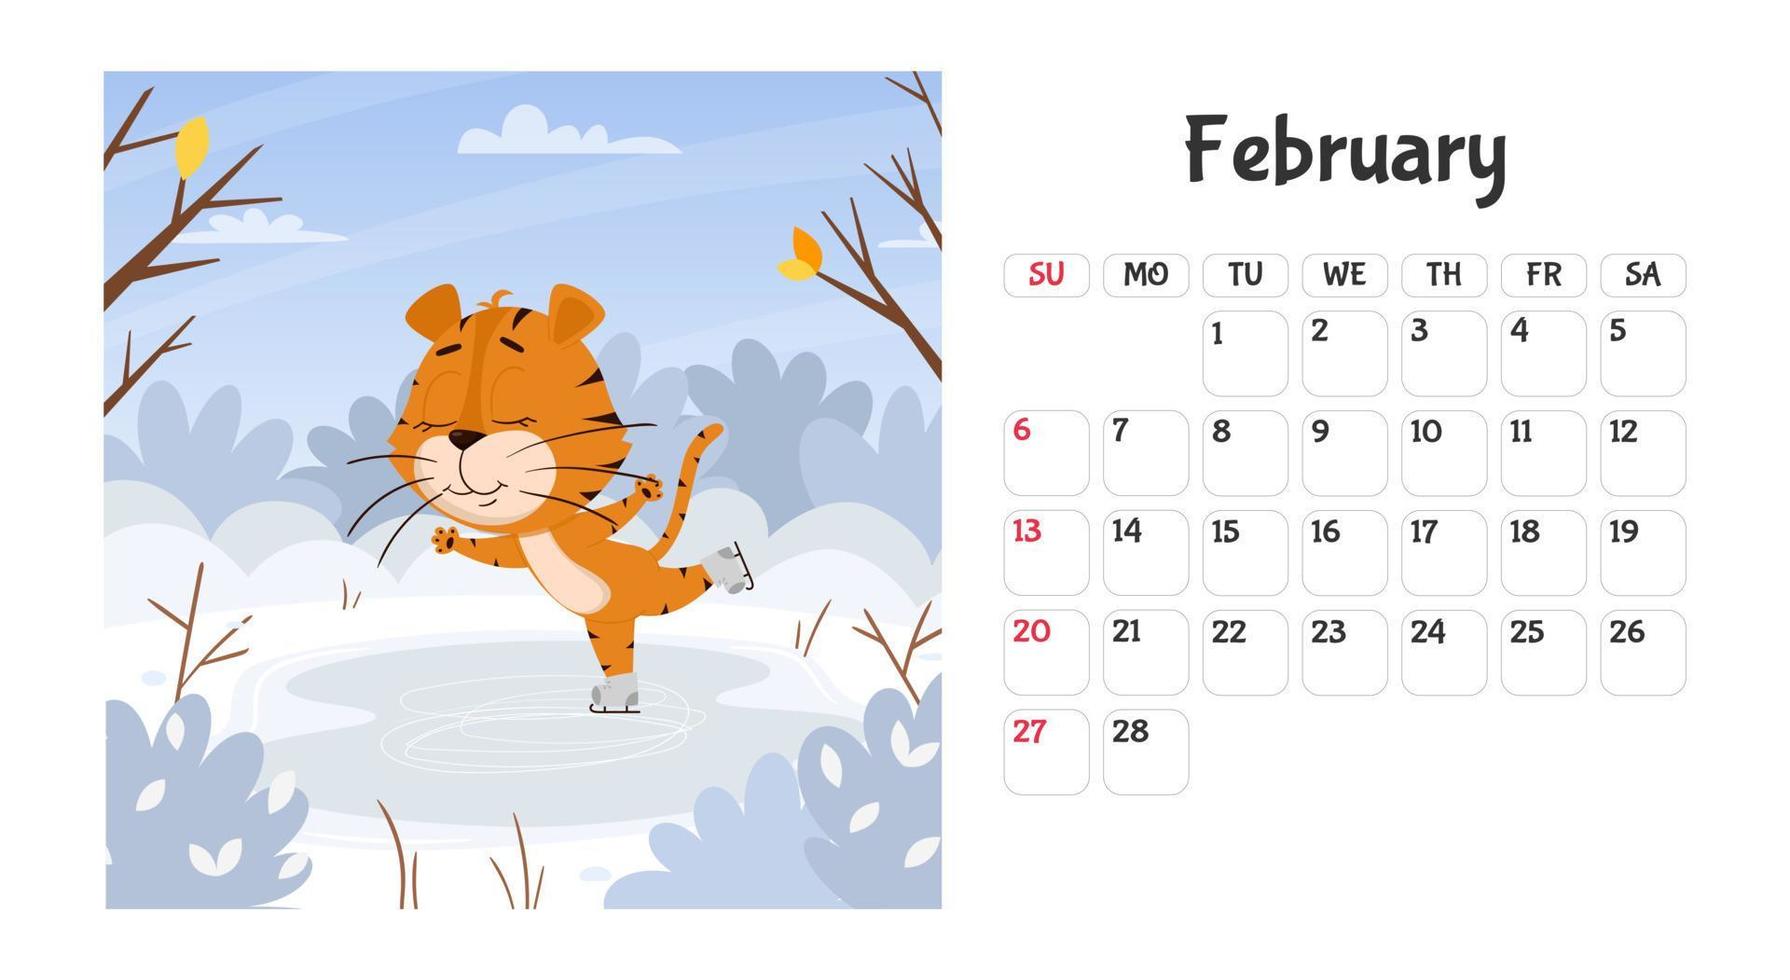 Horizontal desktop calendar page template for February 2022 with a cartoon tiger symbol of the Chinese year. The week starts on Sunday. Tiger skating vector